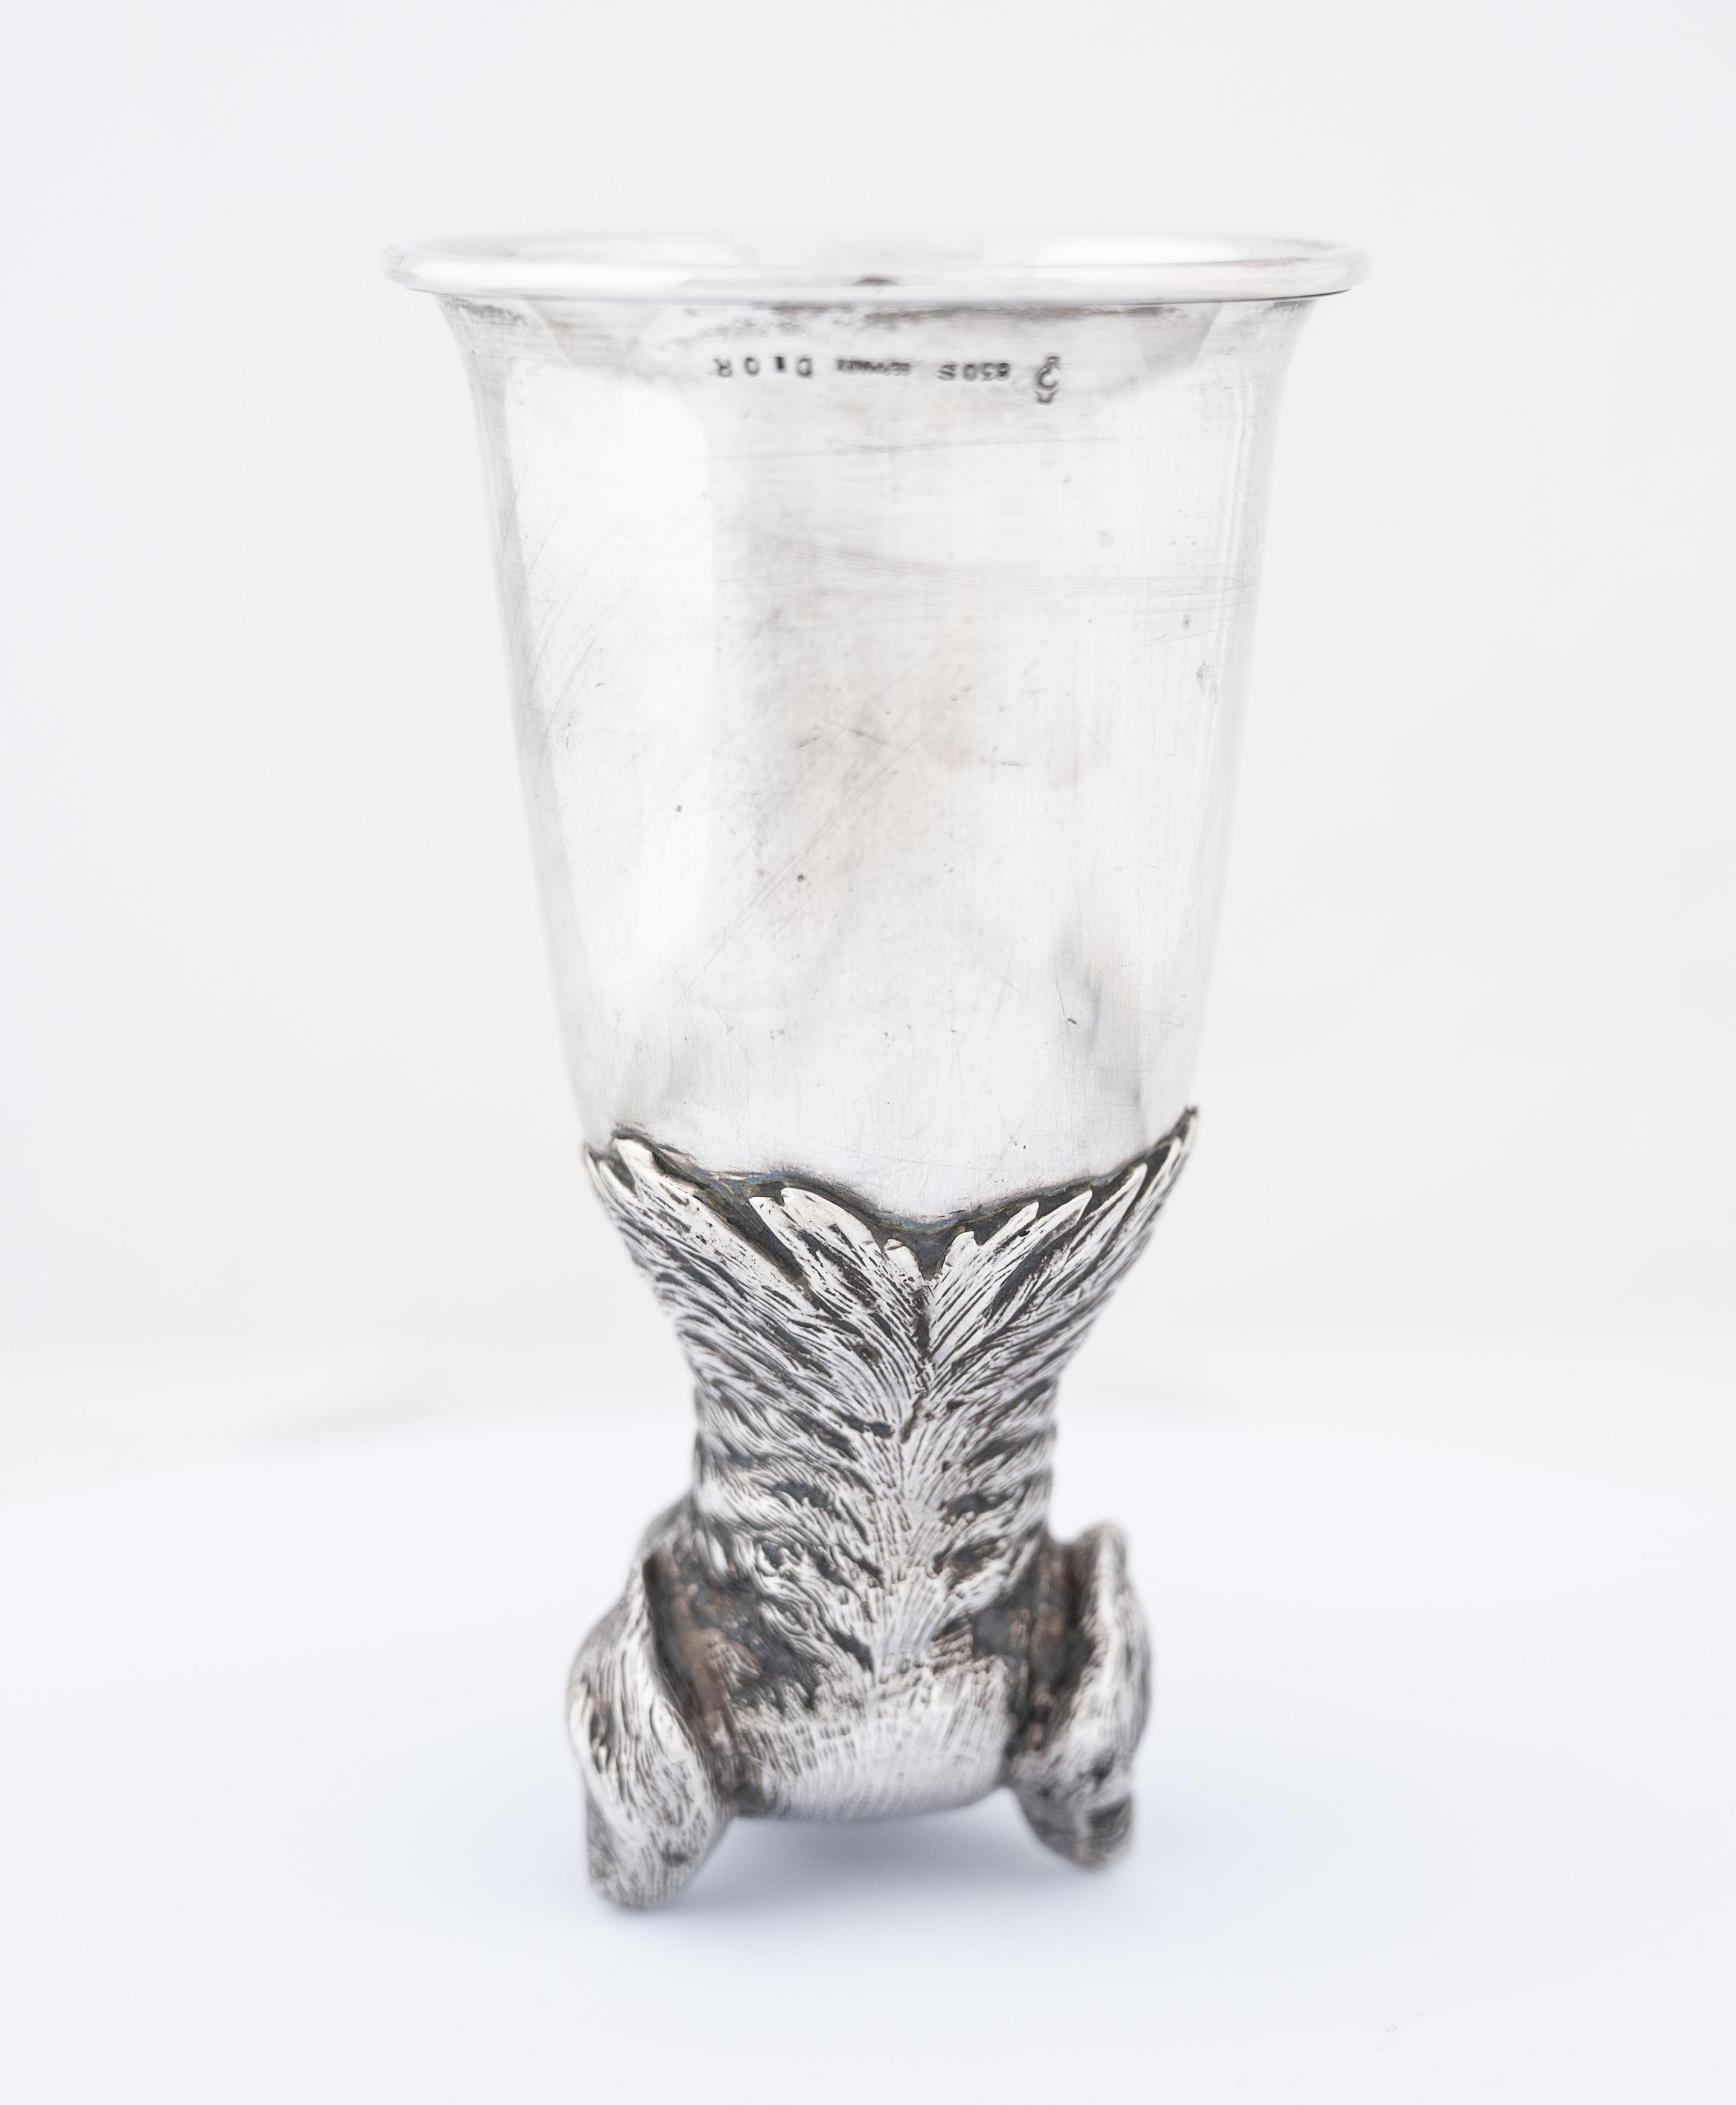 German Silver Hound Stirrup Cup by J. D. Schleissner & Söhne Retailed by Dior For Sale 5